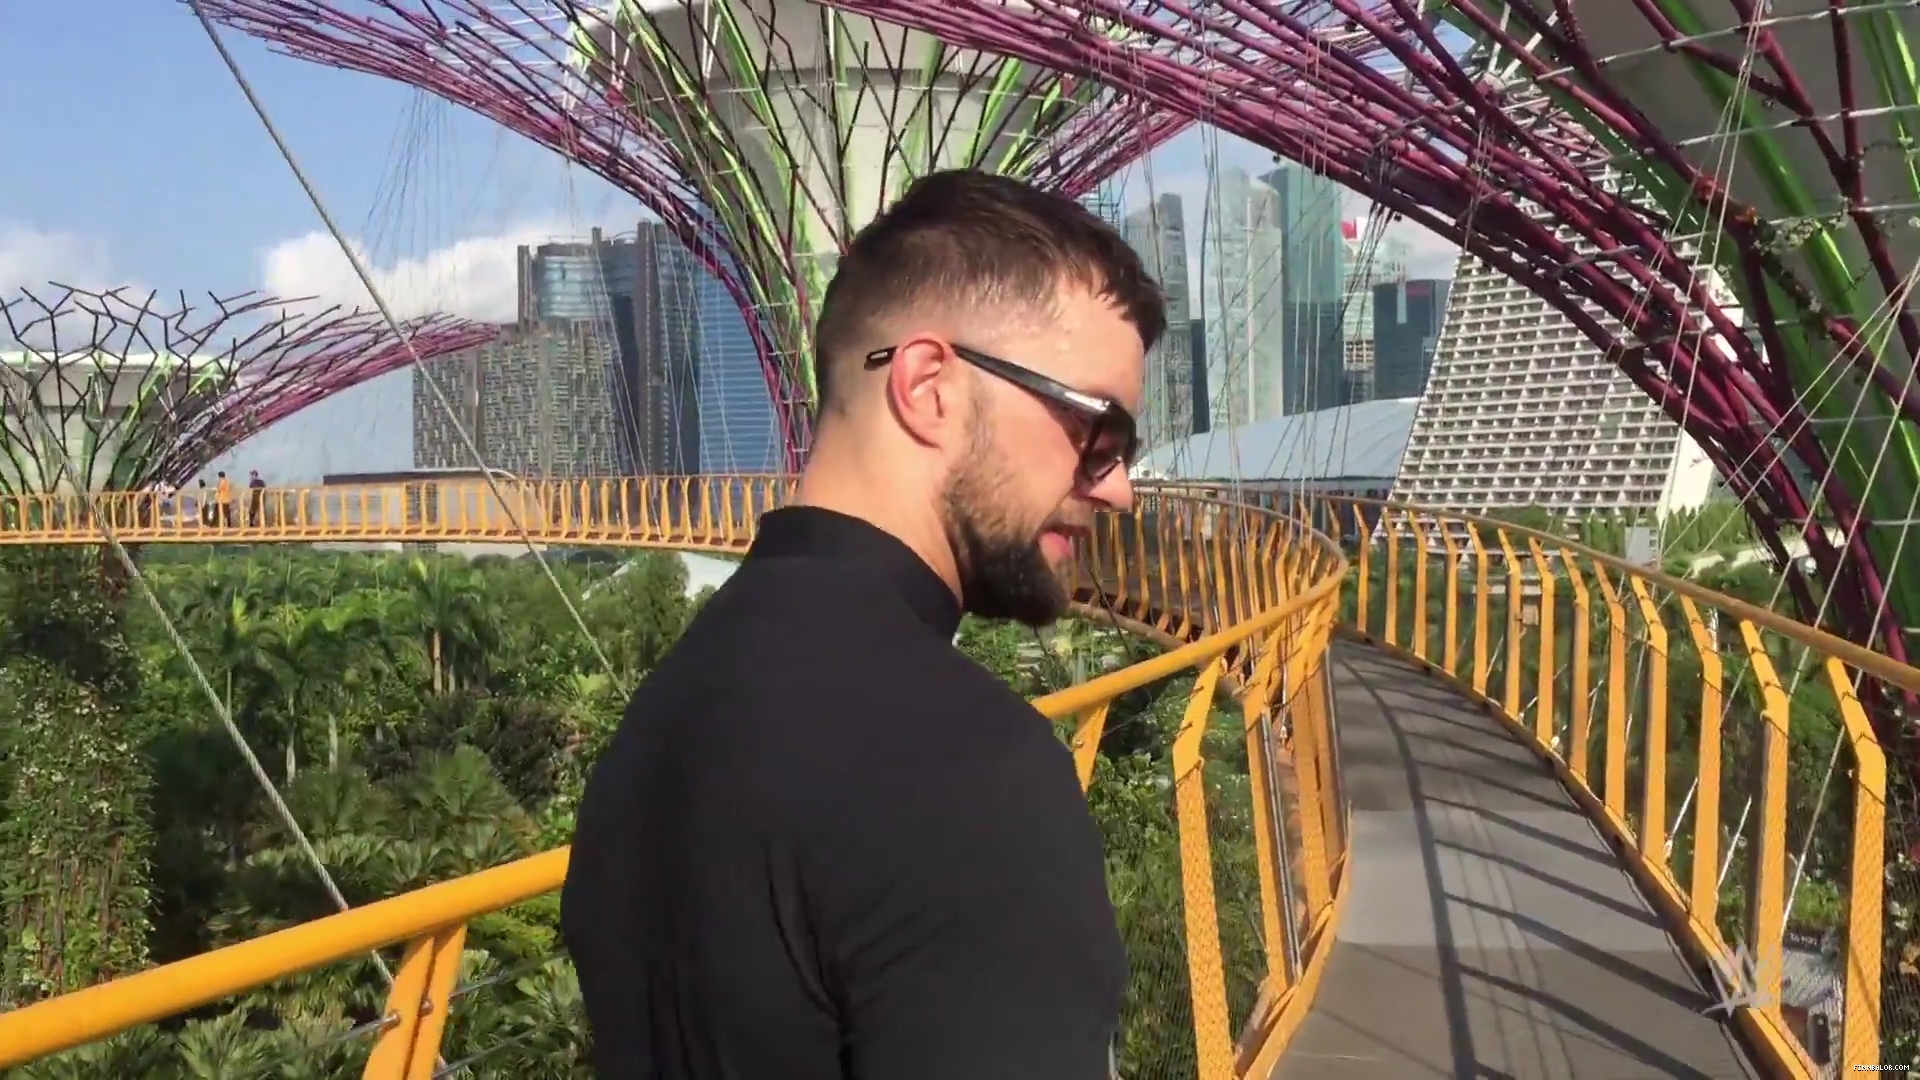 Finn_Balor_feels_like_he_is_in__Star_Wars__while_touring_Singapore_s_Supertree__mp40041.jpg